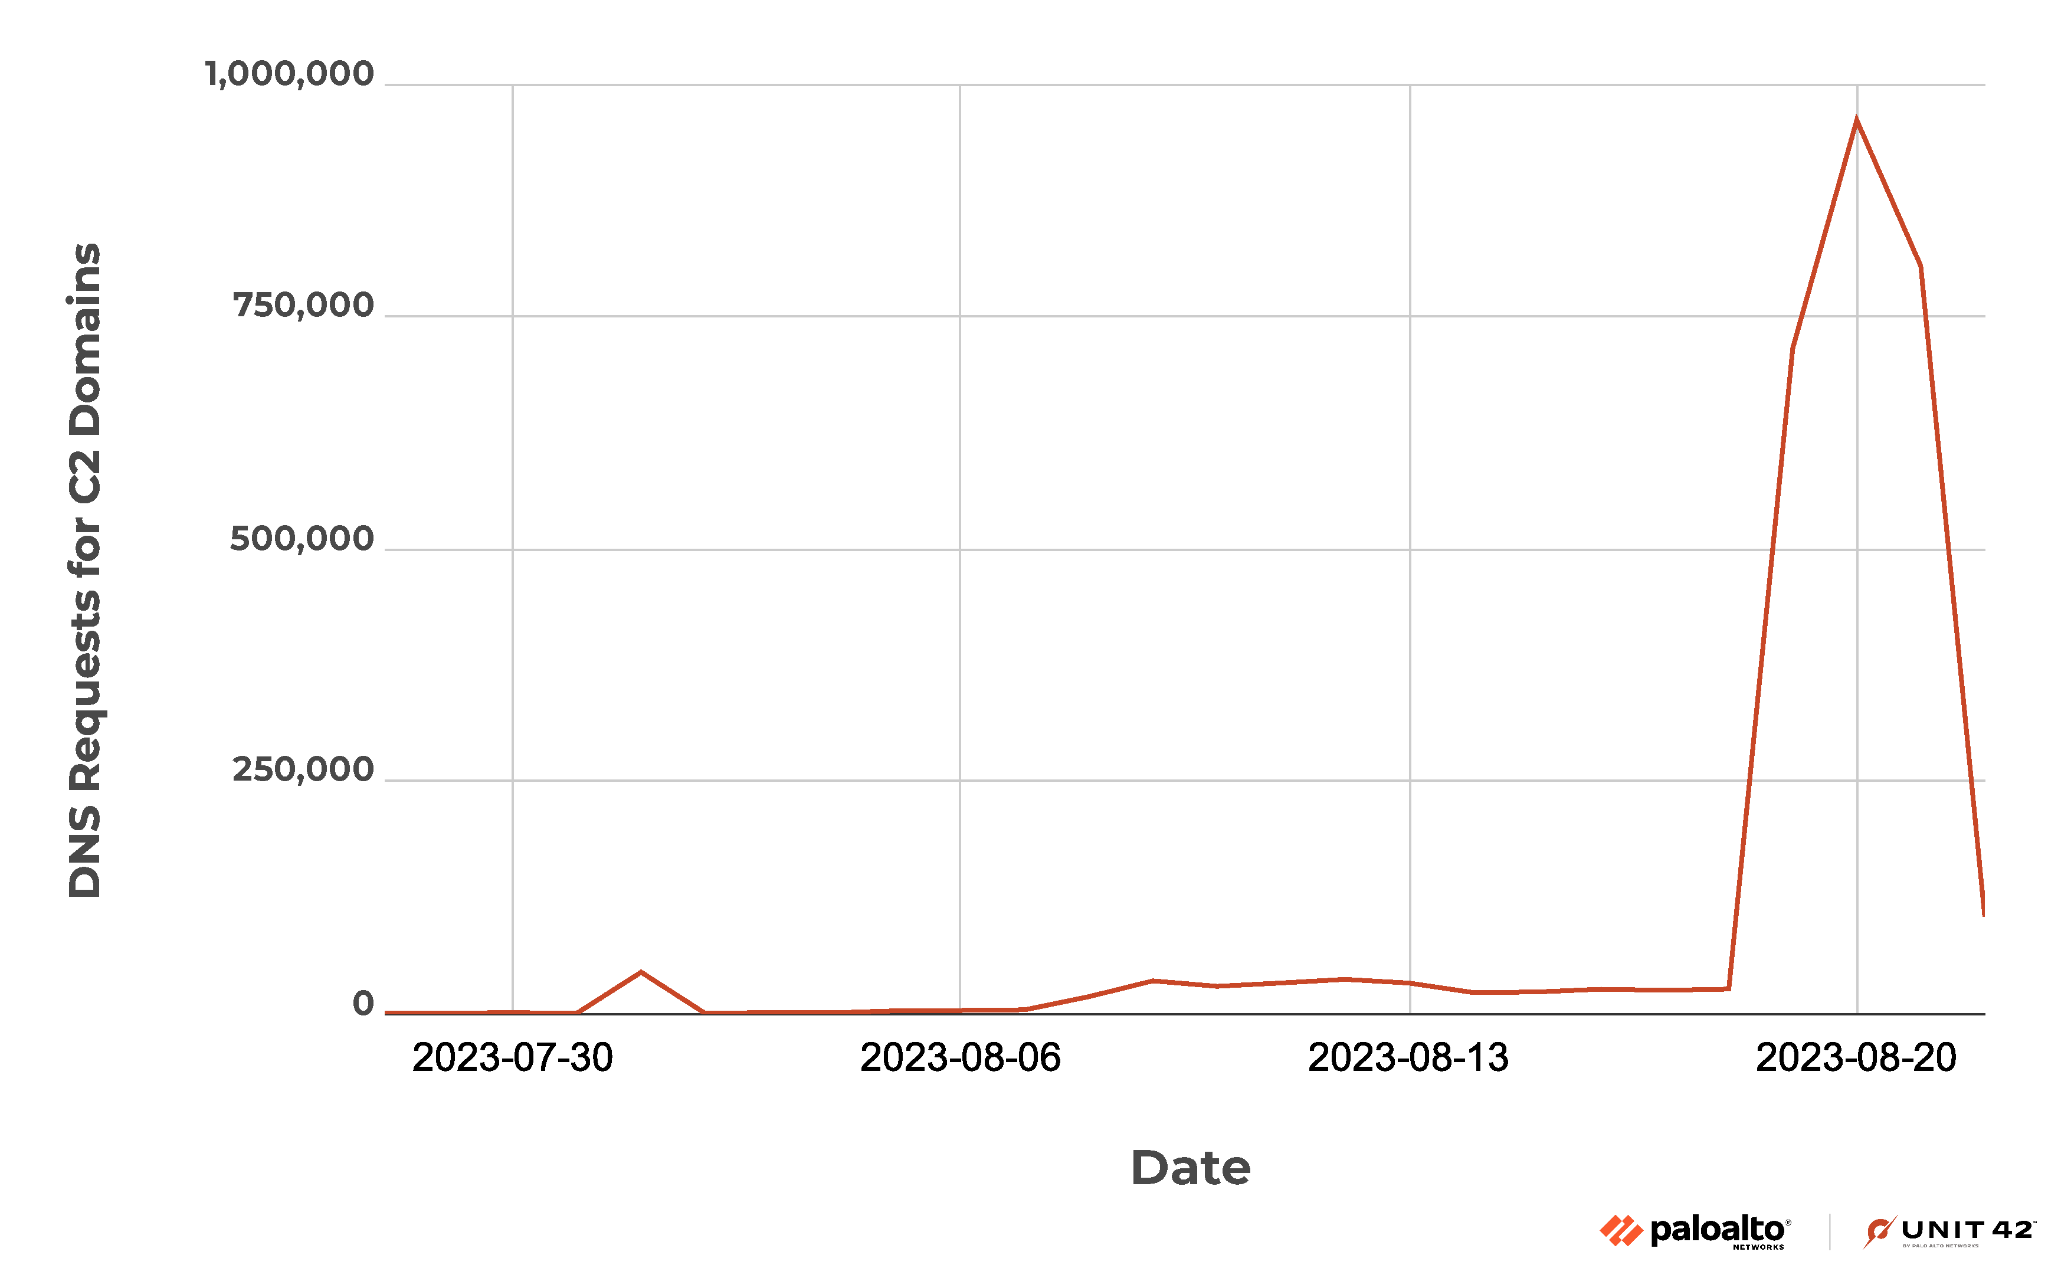 Image 9 is a trend graph of DNS requests for the command and control domains. It begins on July 30, 2023 and ends on August 20, 2023. The largest spike in requests is in August.